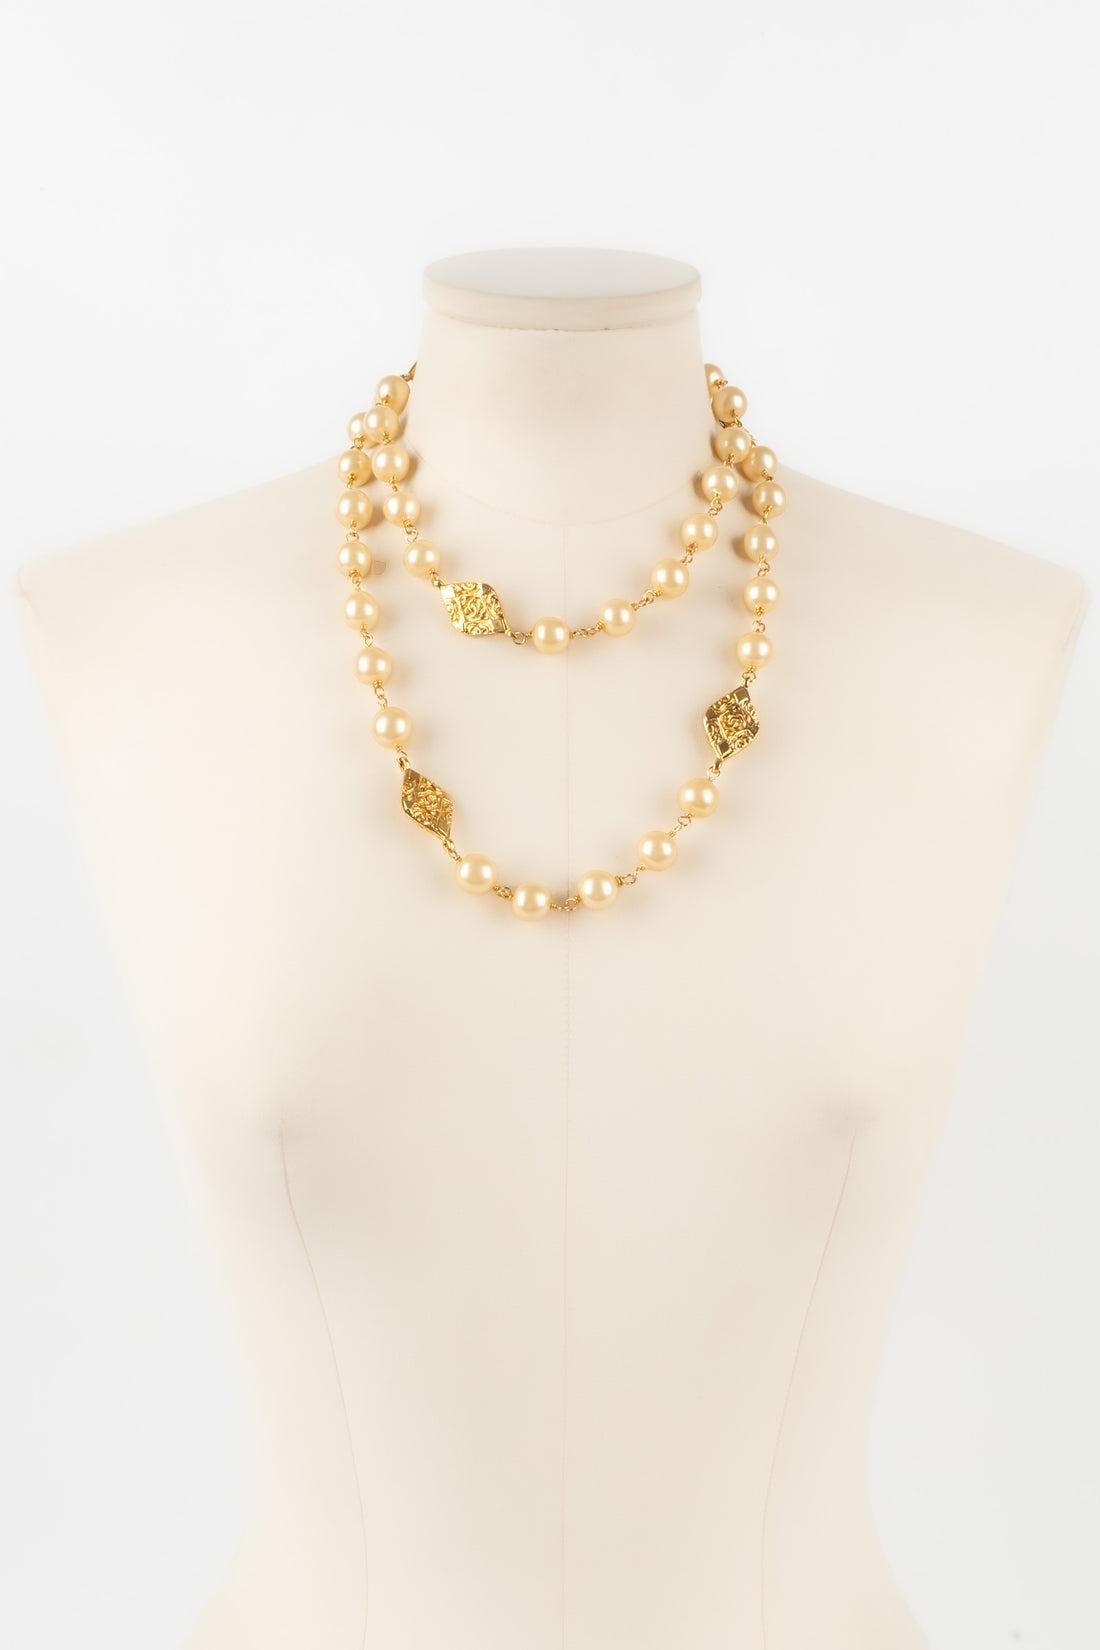 Chanel Costume Pearls Necklace In Excellent Condition For Sale In SAINT-OUEN-SUR-SEINE, FR